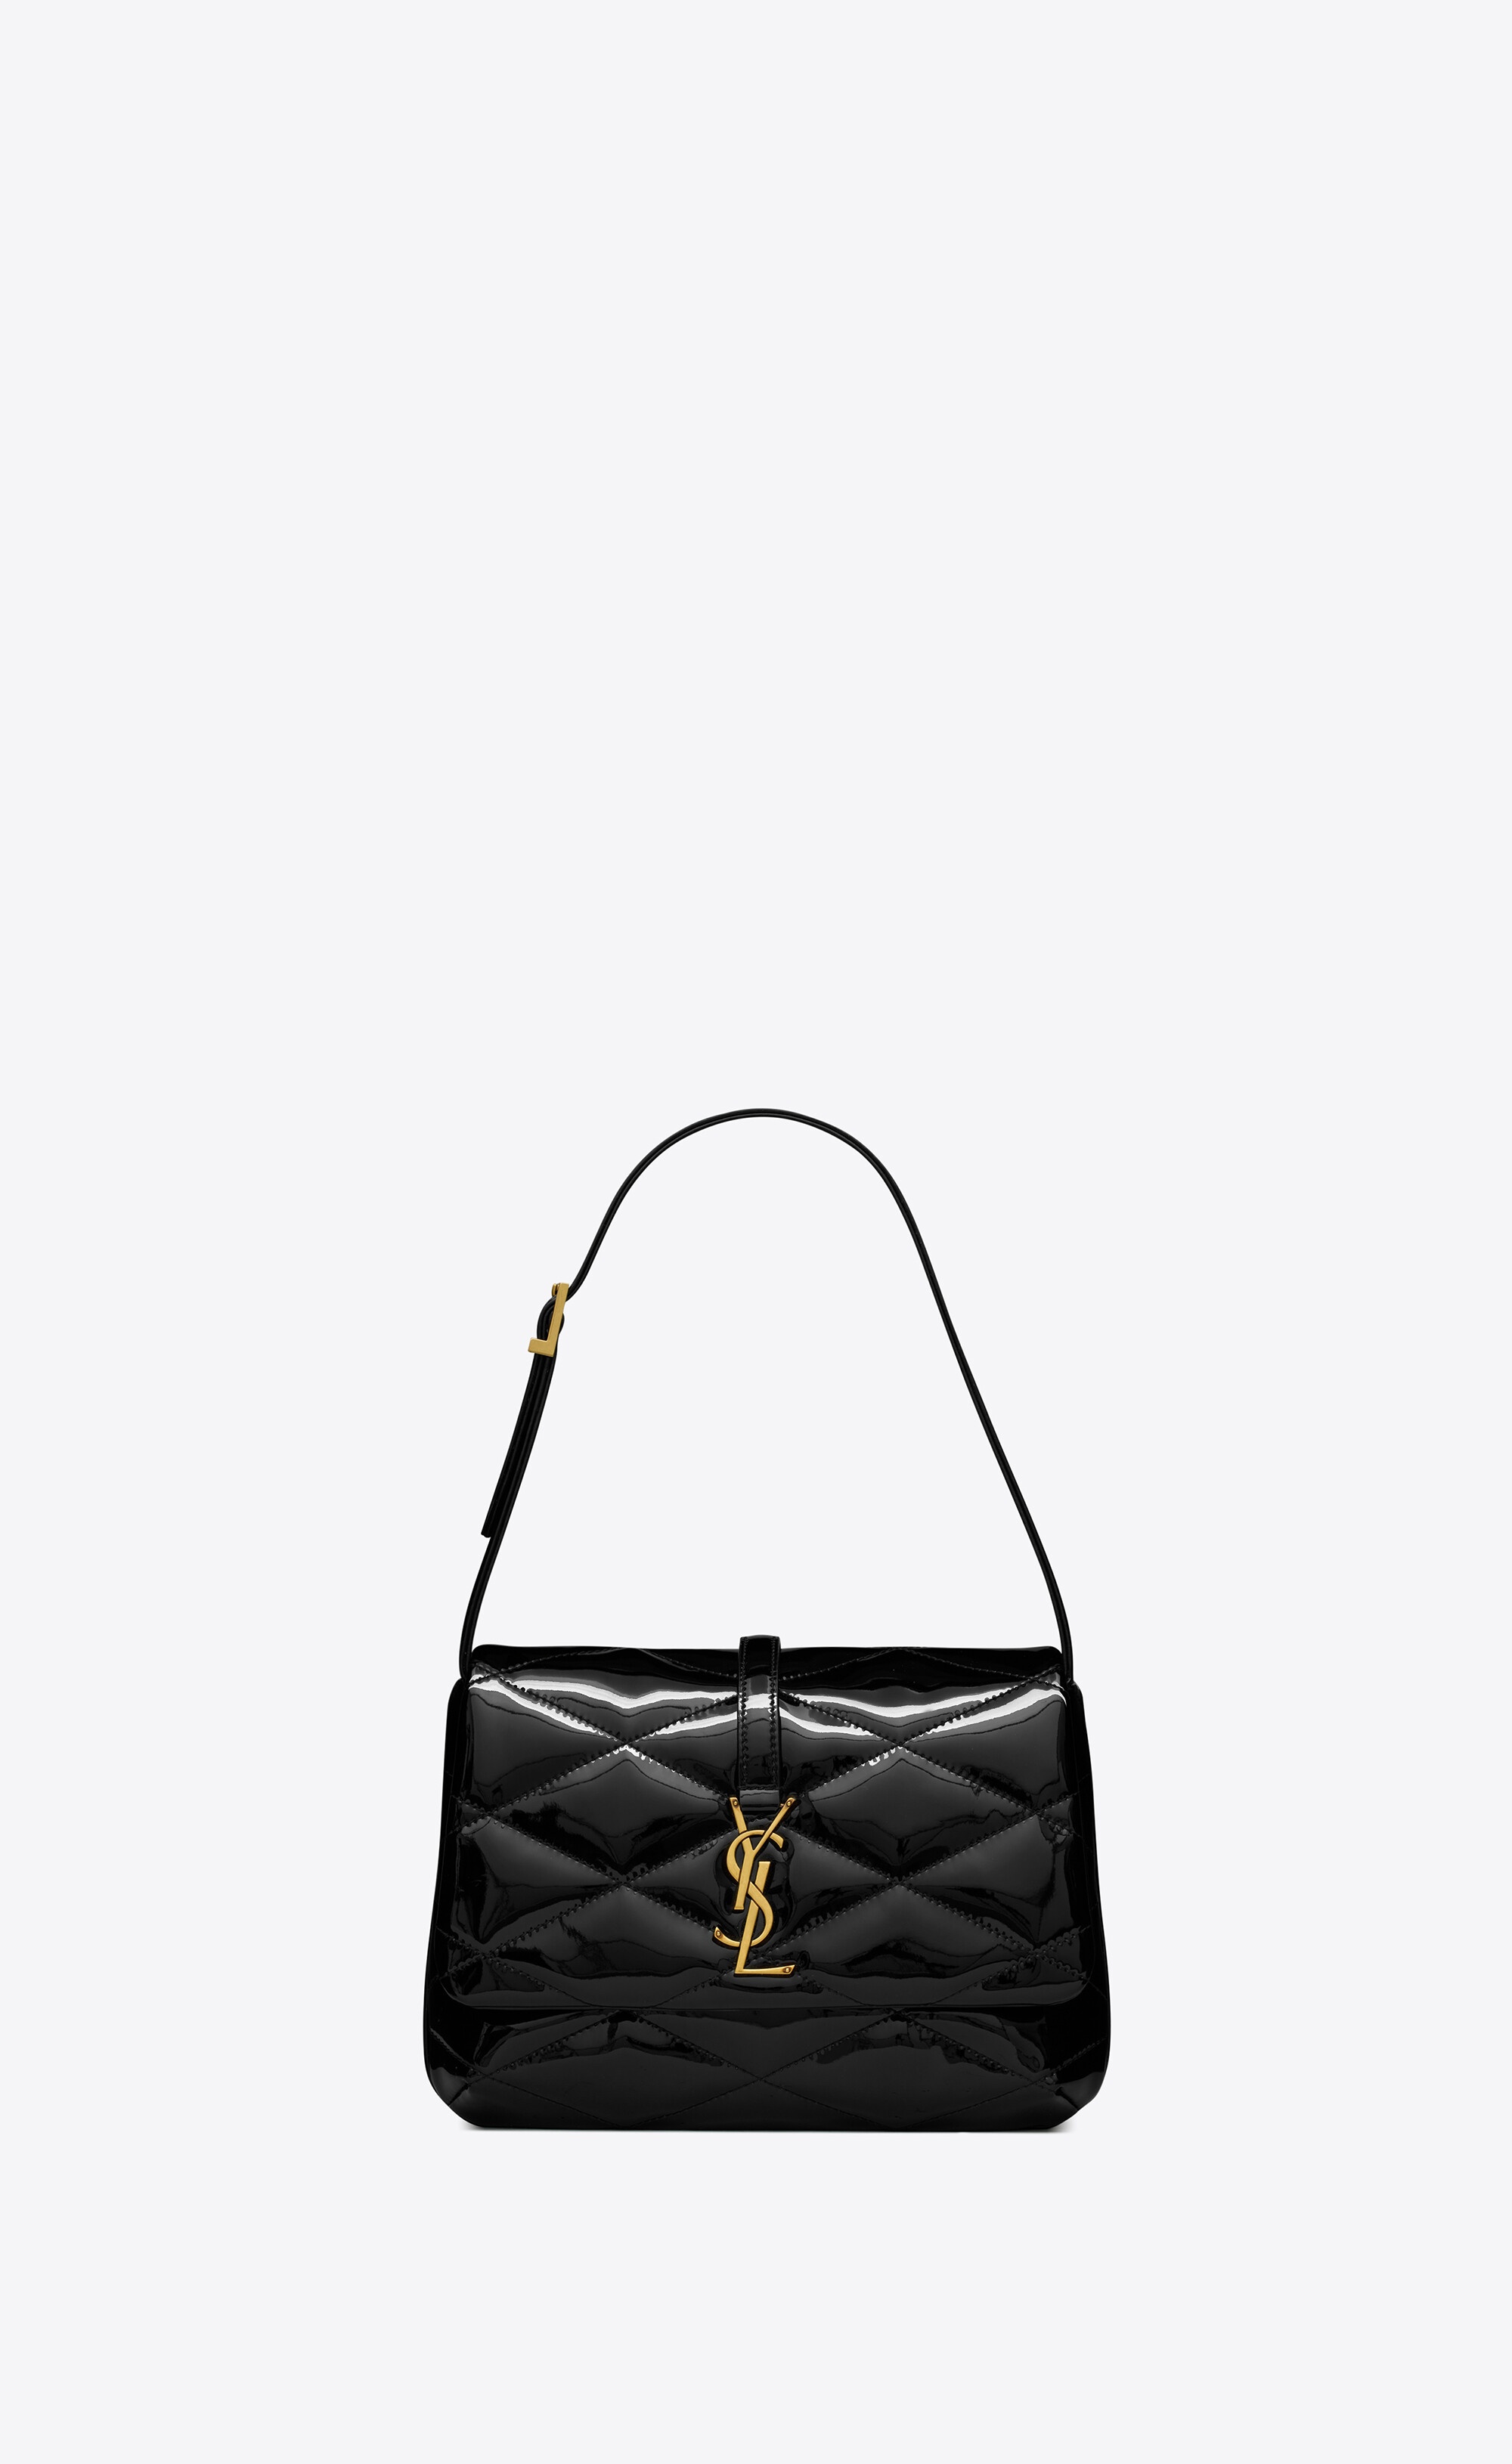 This Season, There's a Saint Laurent Bag for Every Occasion